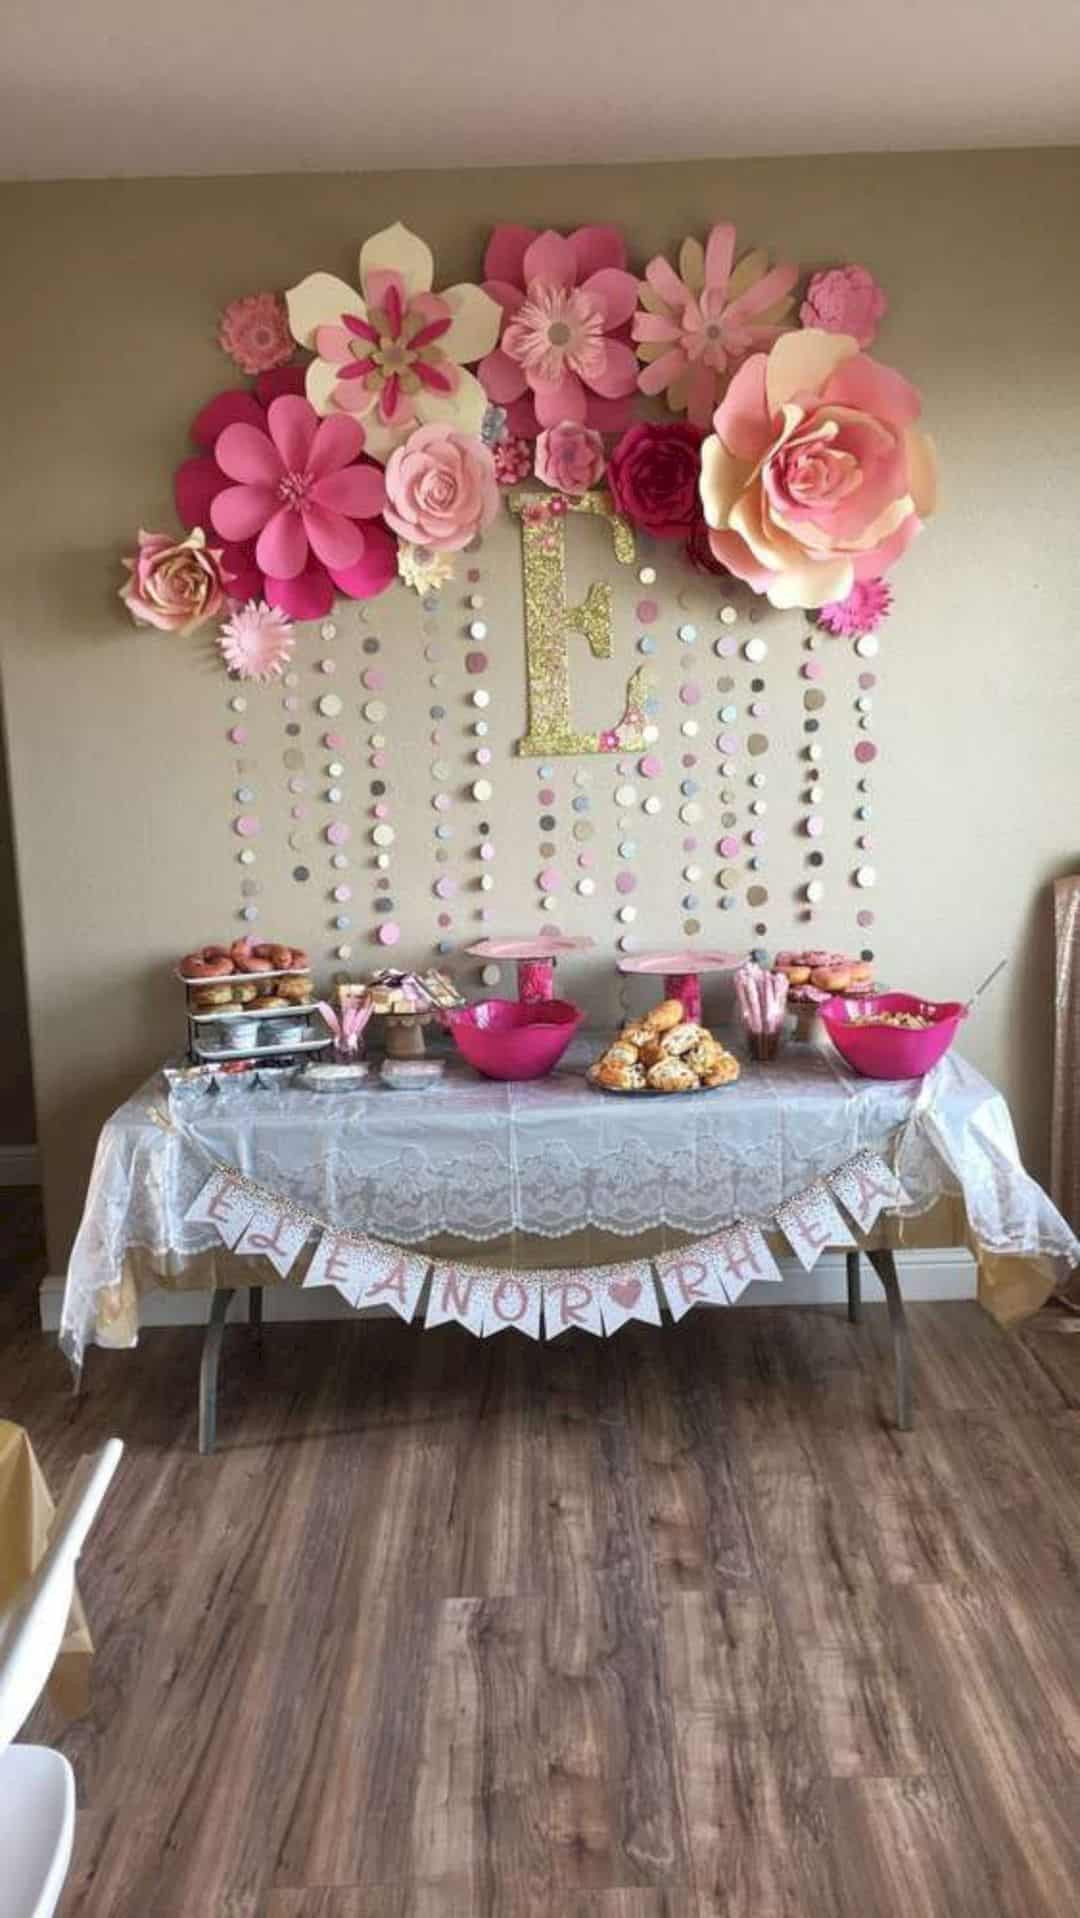 Baby Girl Shower Decorating Ideas
 16 Cute Baby Shower Decorating Ideas